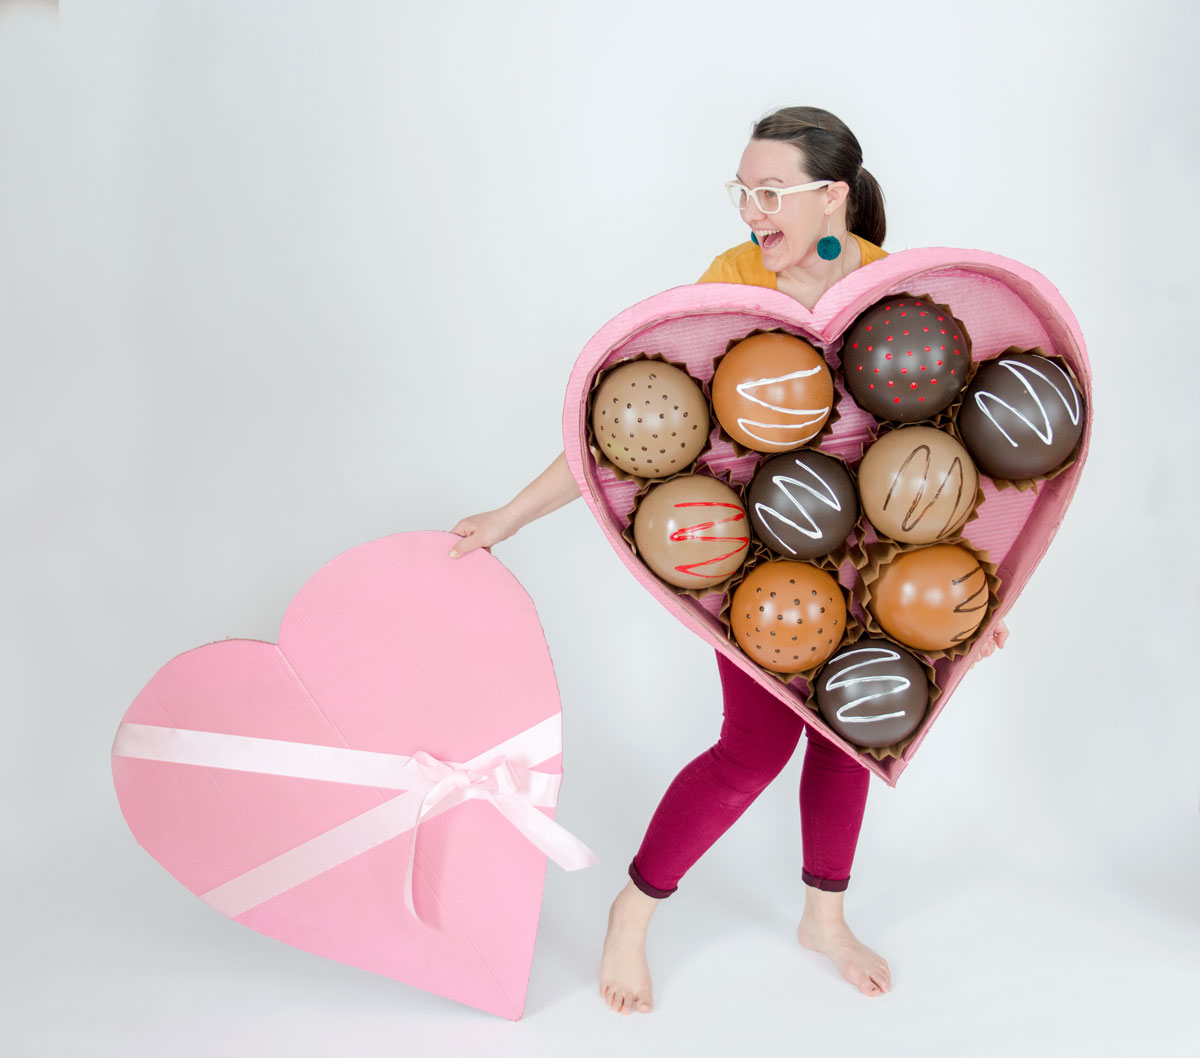 Valentines day costume, box of chocolate costume, DIY heart shaped costume, DIY chocolate costume, DIY box of chocolates costume, oh yay studio costume challenge, how to make a halloween costume, easy costume ideas